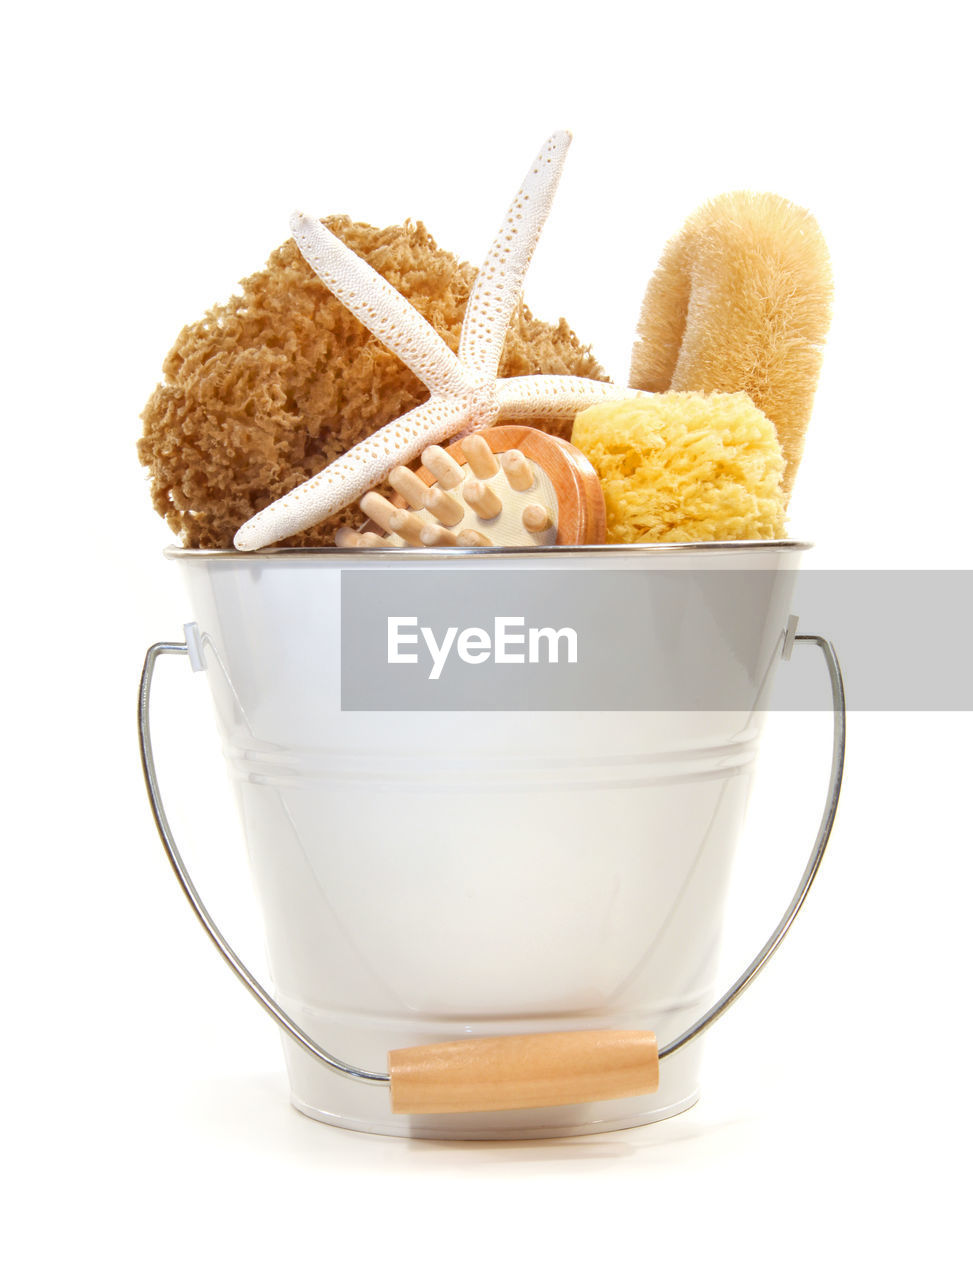 food and drink, food, white background, cut out, snack, studio shot, fast food, dish, cup, healthy eating, dessert, wellbeing, indoors, drink, white, freshness, breakfast, meal, no people